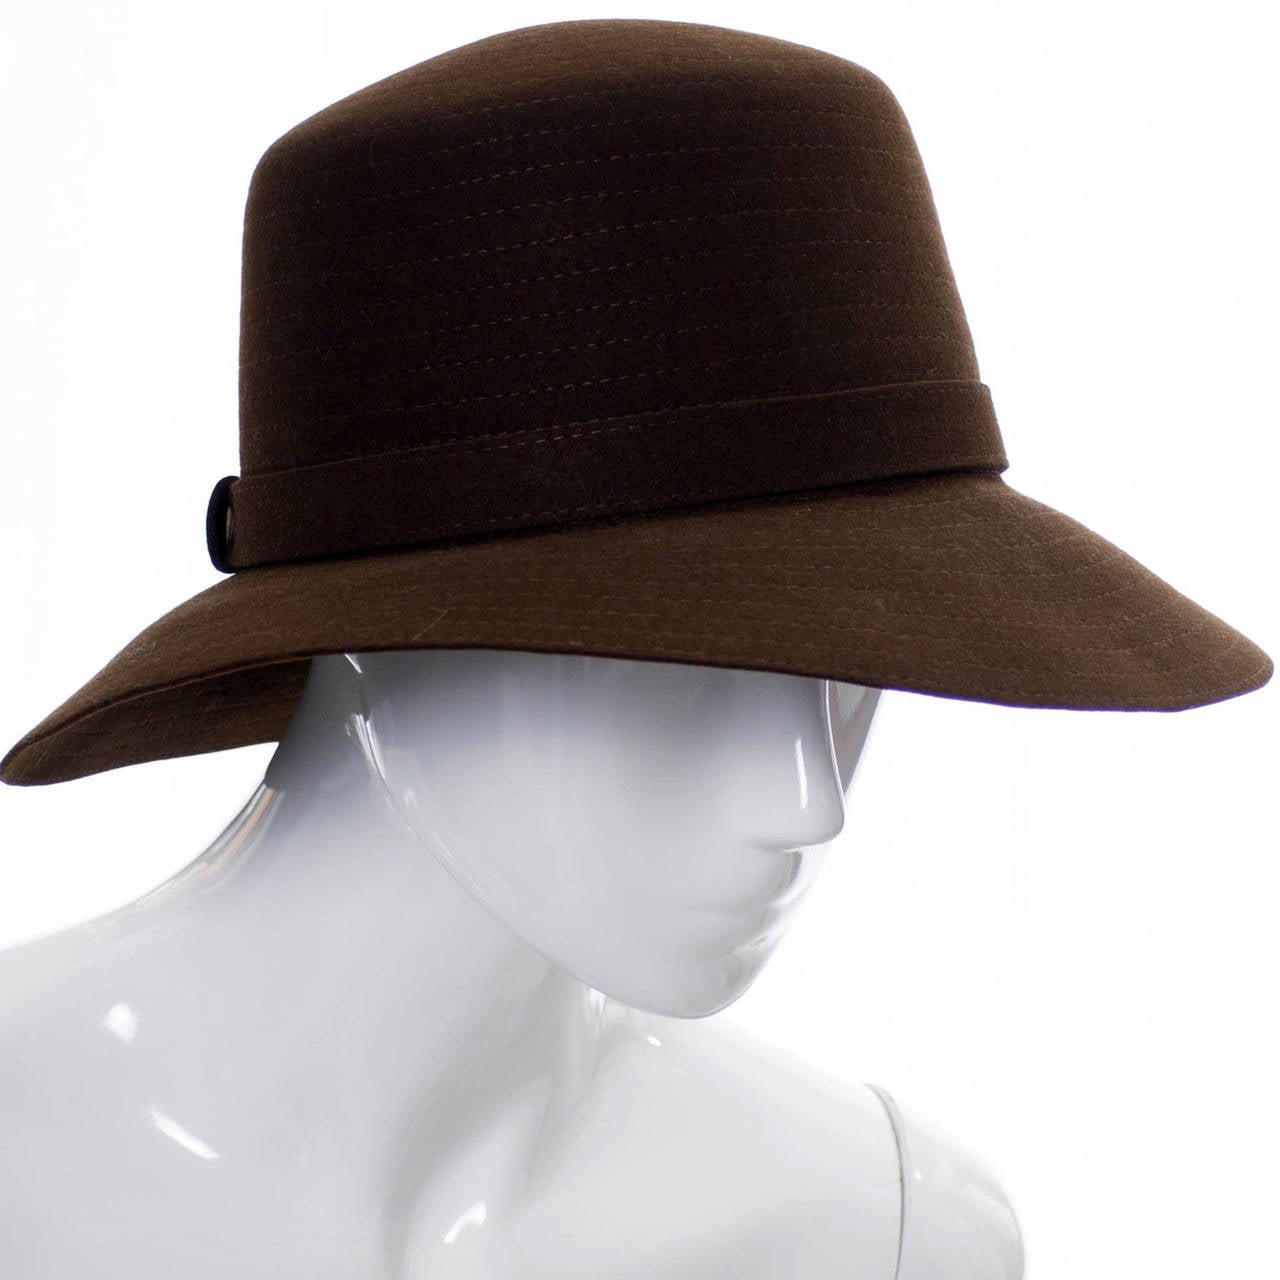 This vintage 1970s Givenchy Nouvelle Boutique brown fur felt hat is in excellent condition and came from the dream estate we acquired that included a wardrobe that represented e a who's who list of 20th century fashion designers. The hat appears to